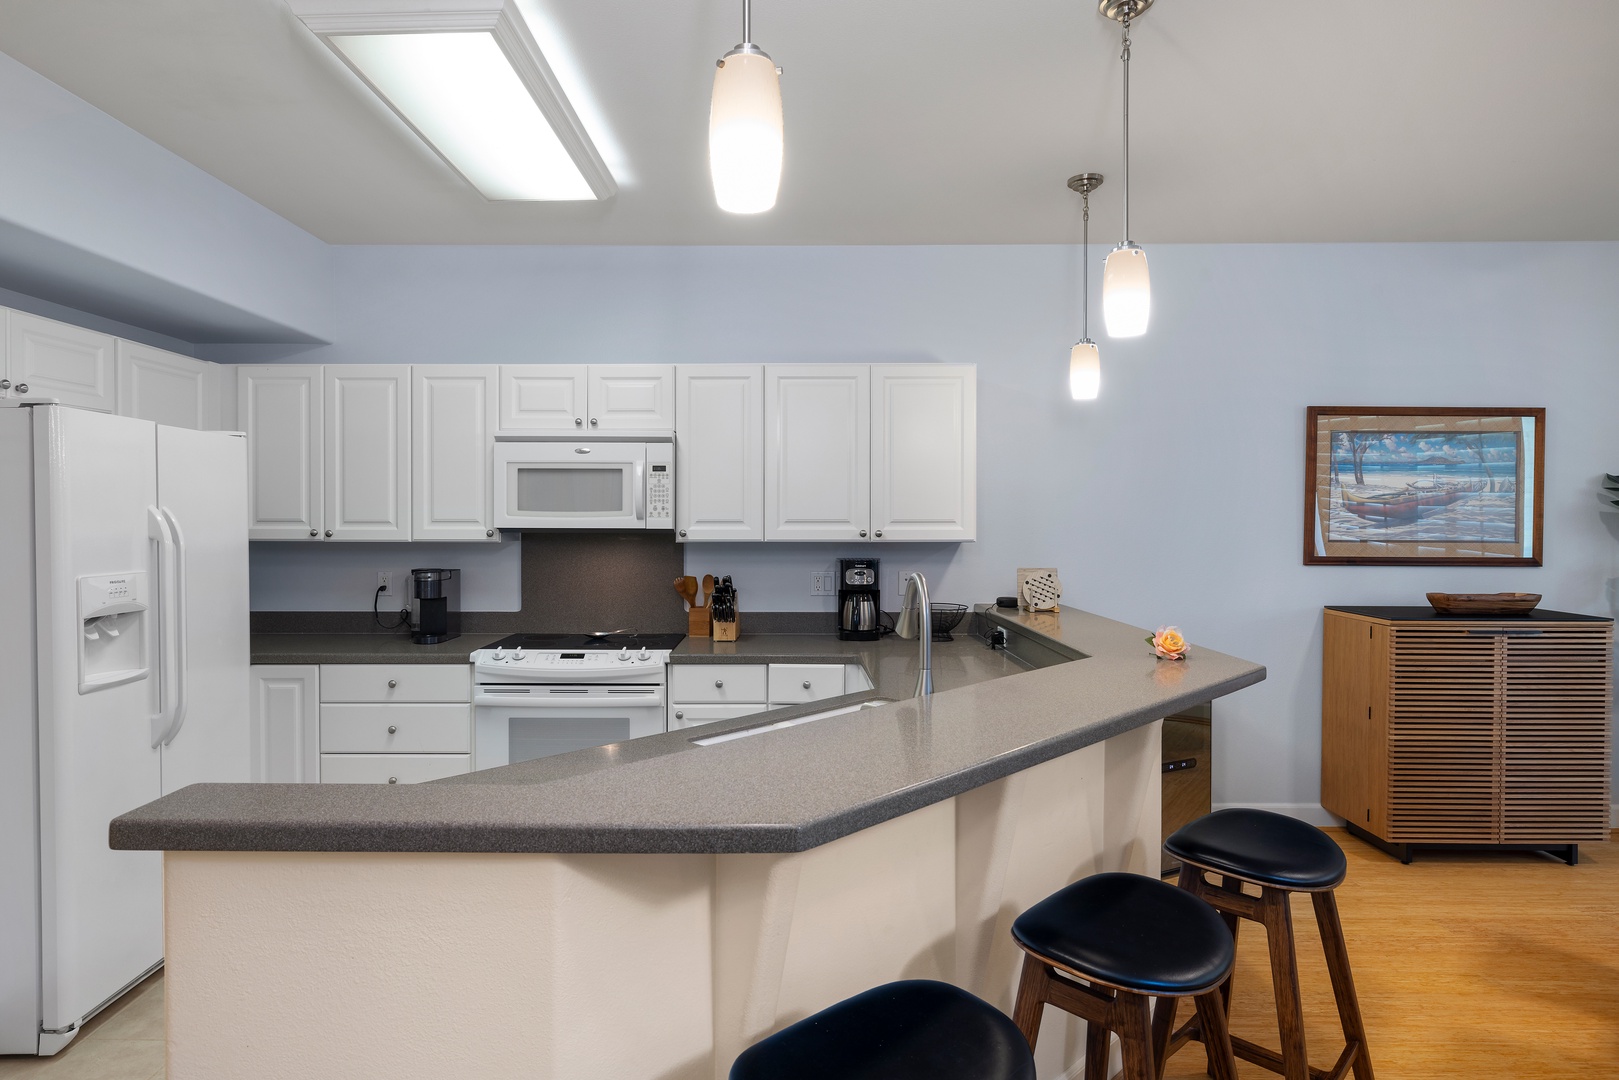 Kapolei Vacation Rentals, Ko Olina Kai 1083C - Everything you need for a culinary adventure in the kitchen.